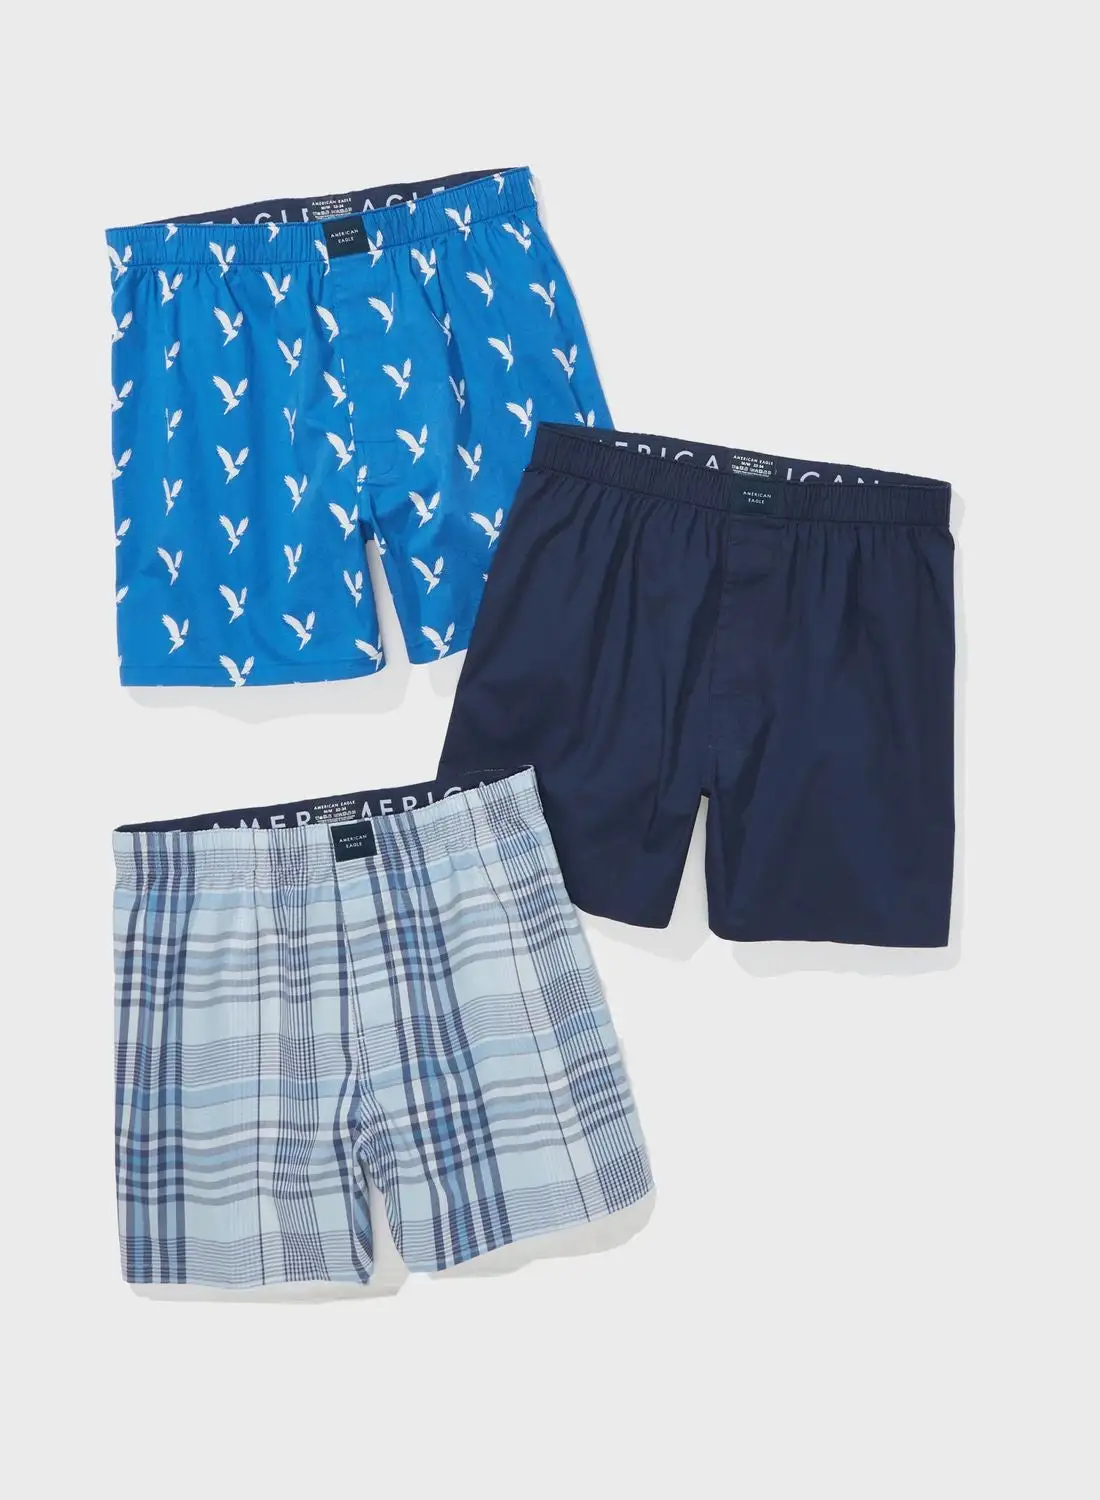 American Eagle 3 Pack Assorted Trunks